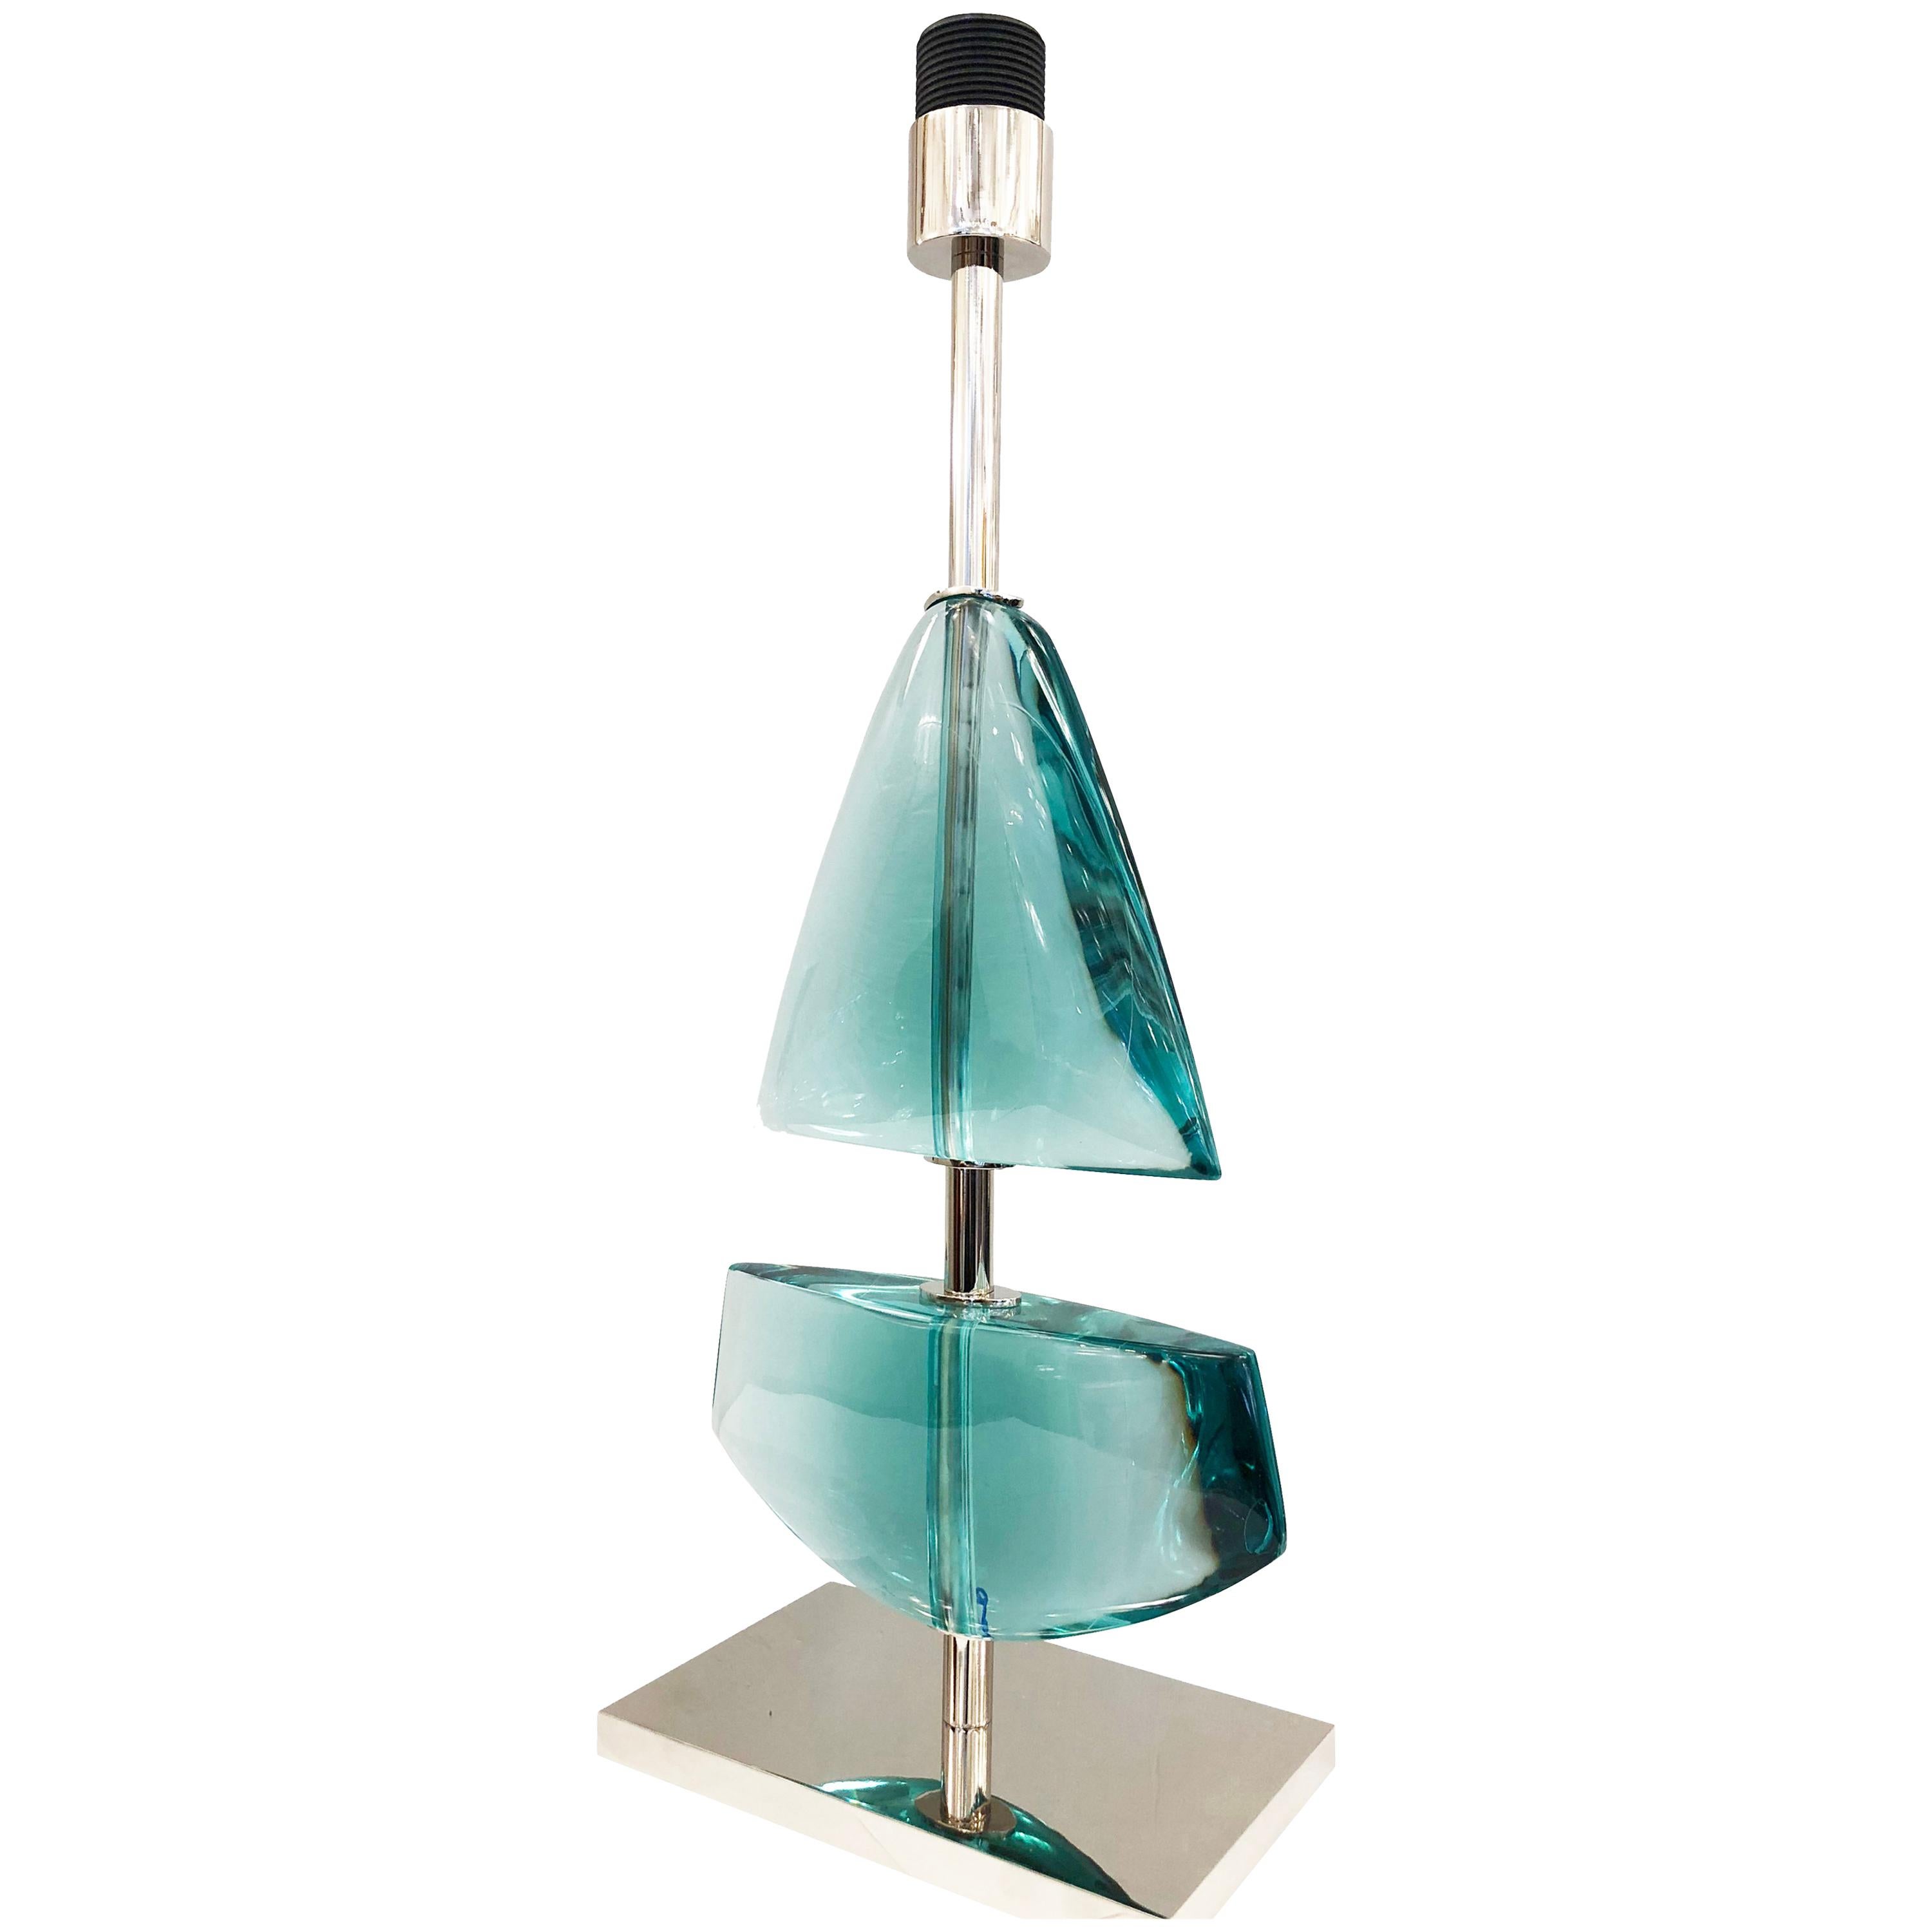 Limited edition glass table lamp made by glass artist Effetto Vetro for Gaspare Asaro’s studio line, formA. Each lamp is hand carved in two sections reminiscent of a sail boat. Available in six different colors. The stem and base are nickel but can